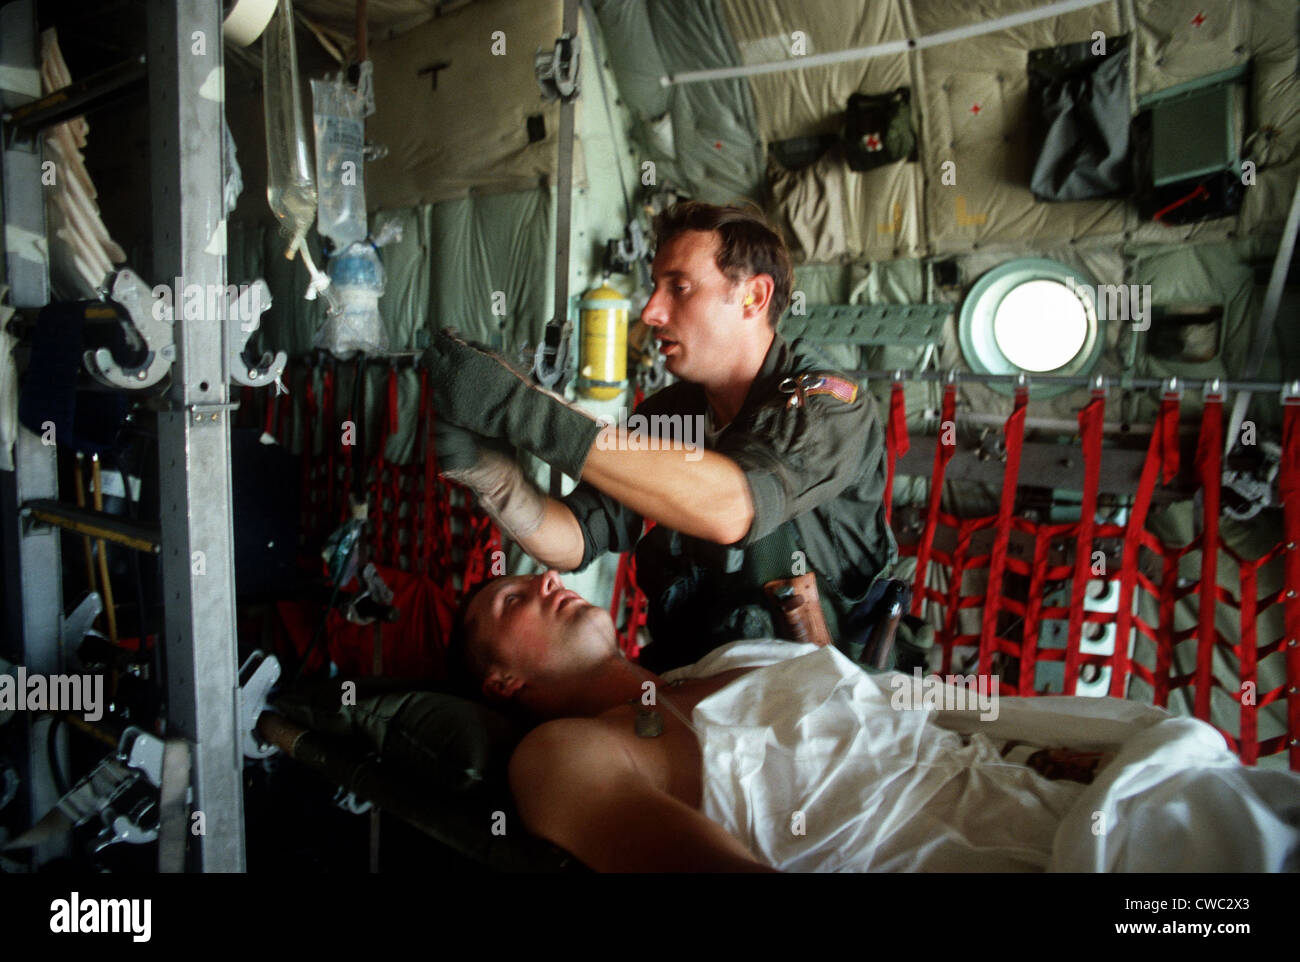 A medic adjusts the intravenous drip bag of a wounded US serviceman en route to a medical facility after the invasion of Stock Photo